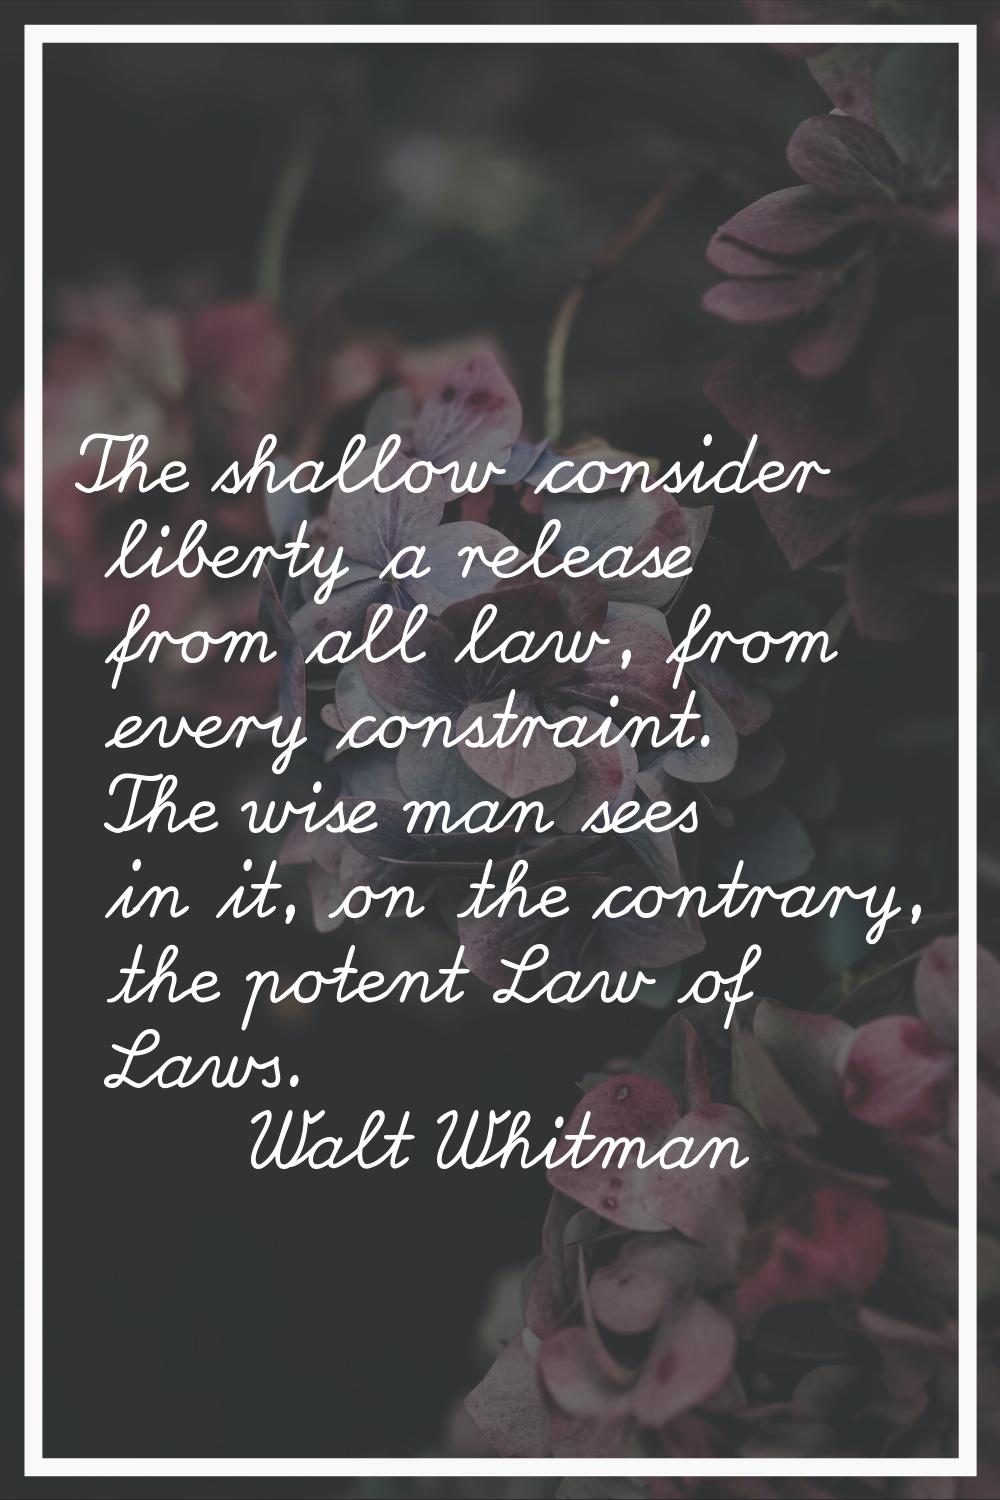 The shallow consider liberty a release from all law, from every constraint. The wise man sees in it